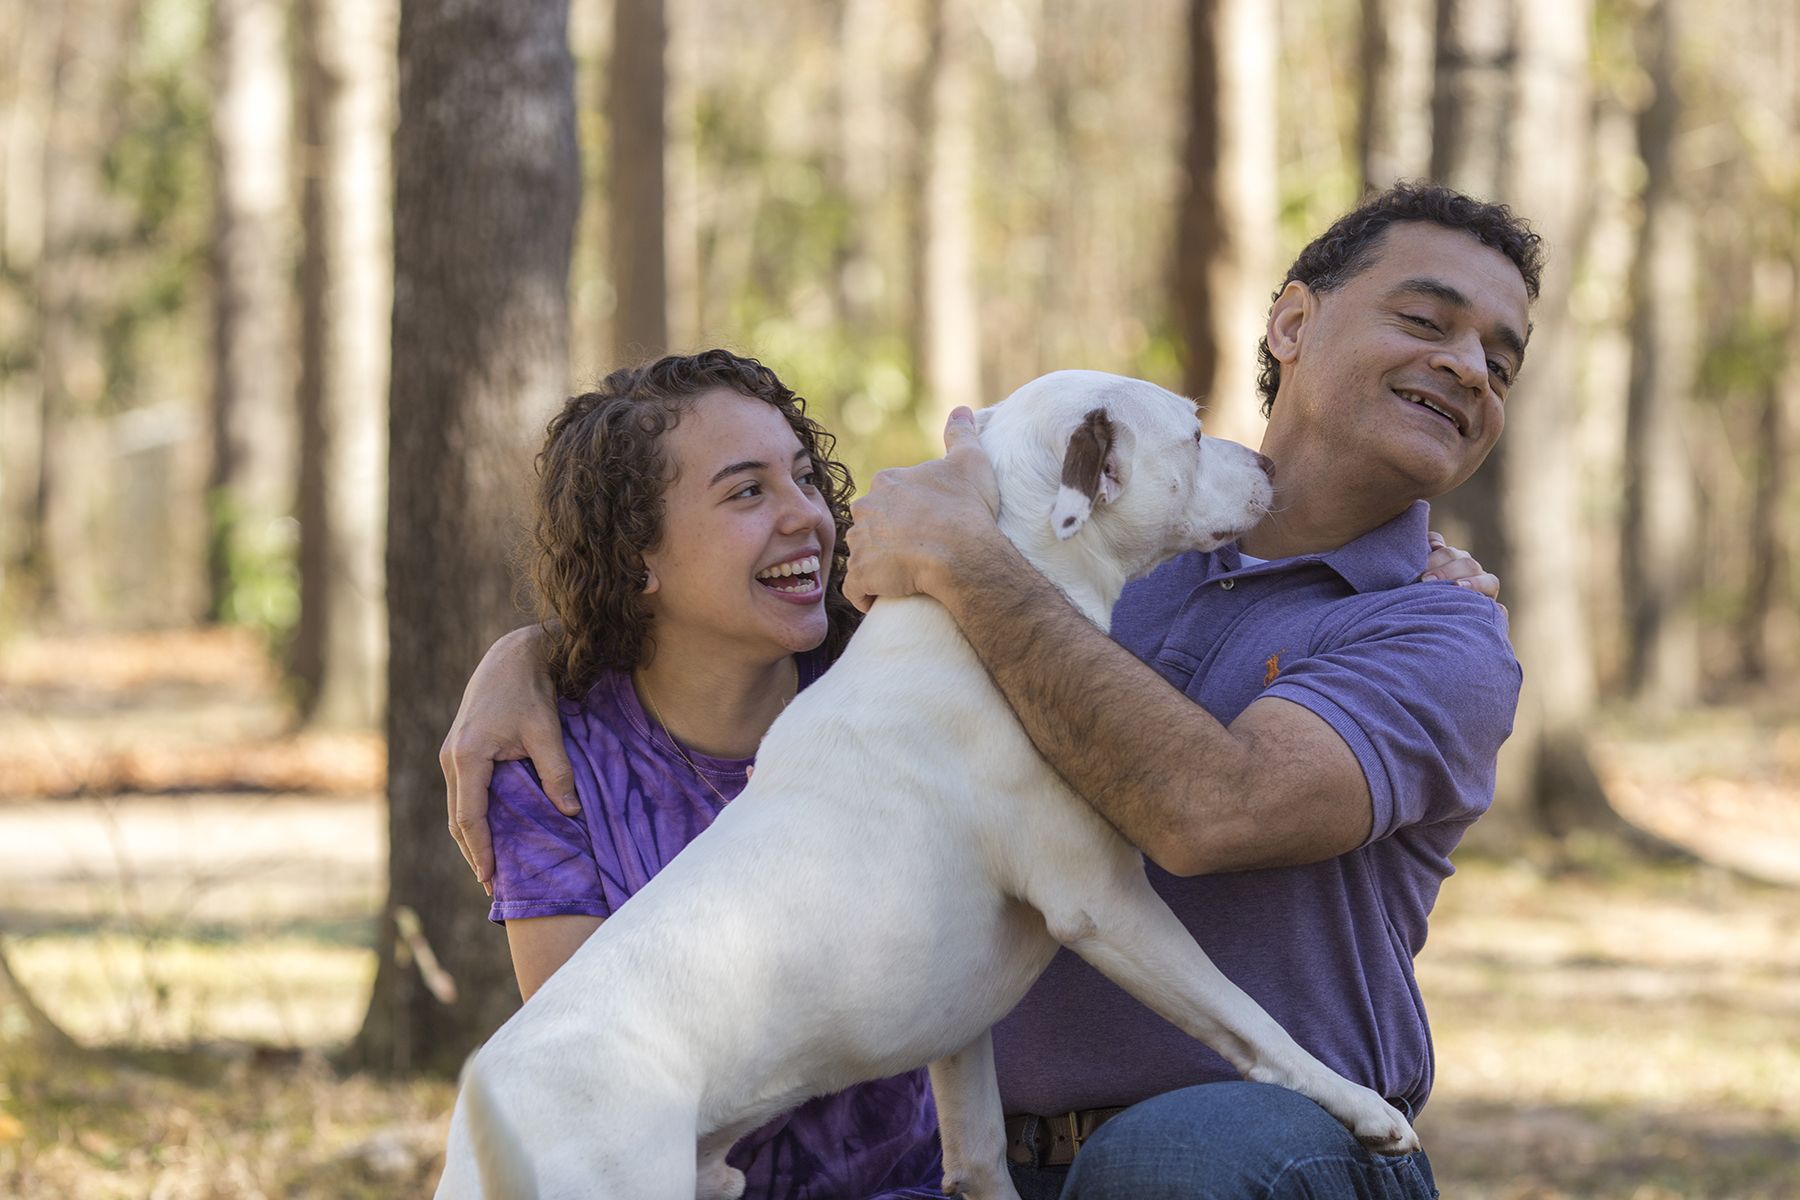 medium sized white dog licks dad's face as teen girl laughs.